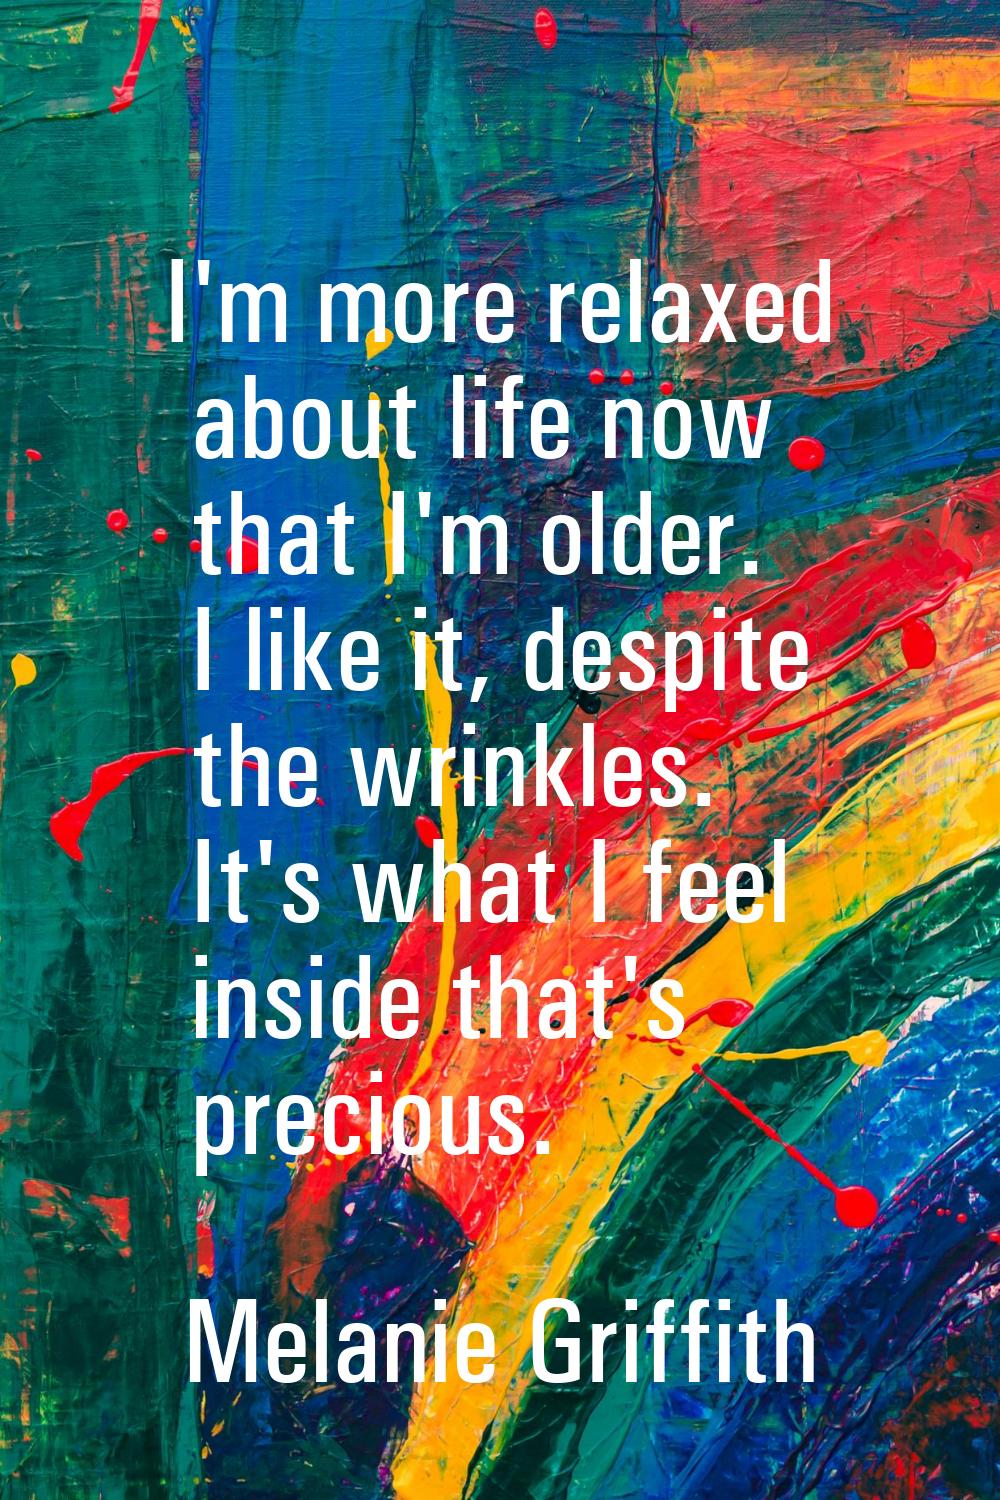 I'm more relaxed about life now that I'm older. I like it, despite the wrinkles. It's what I feel i